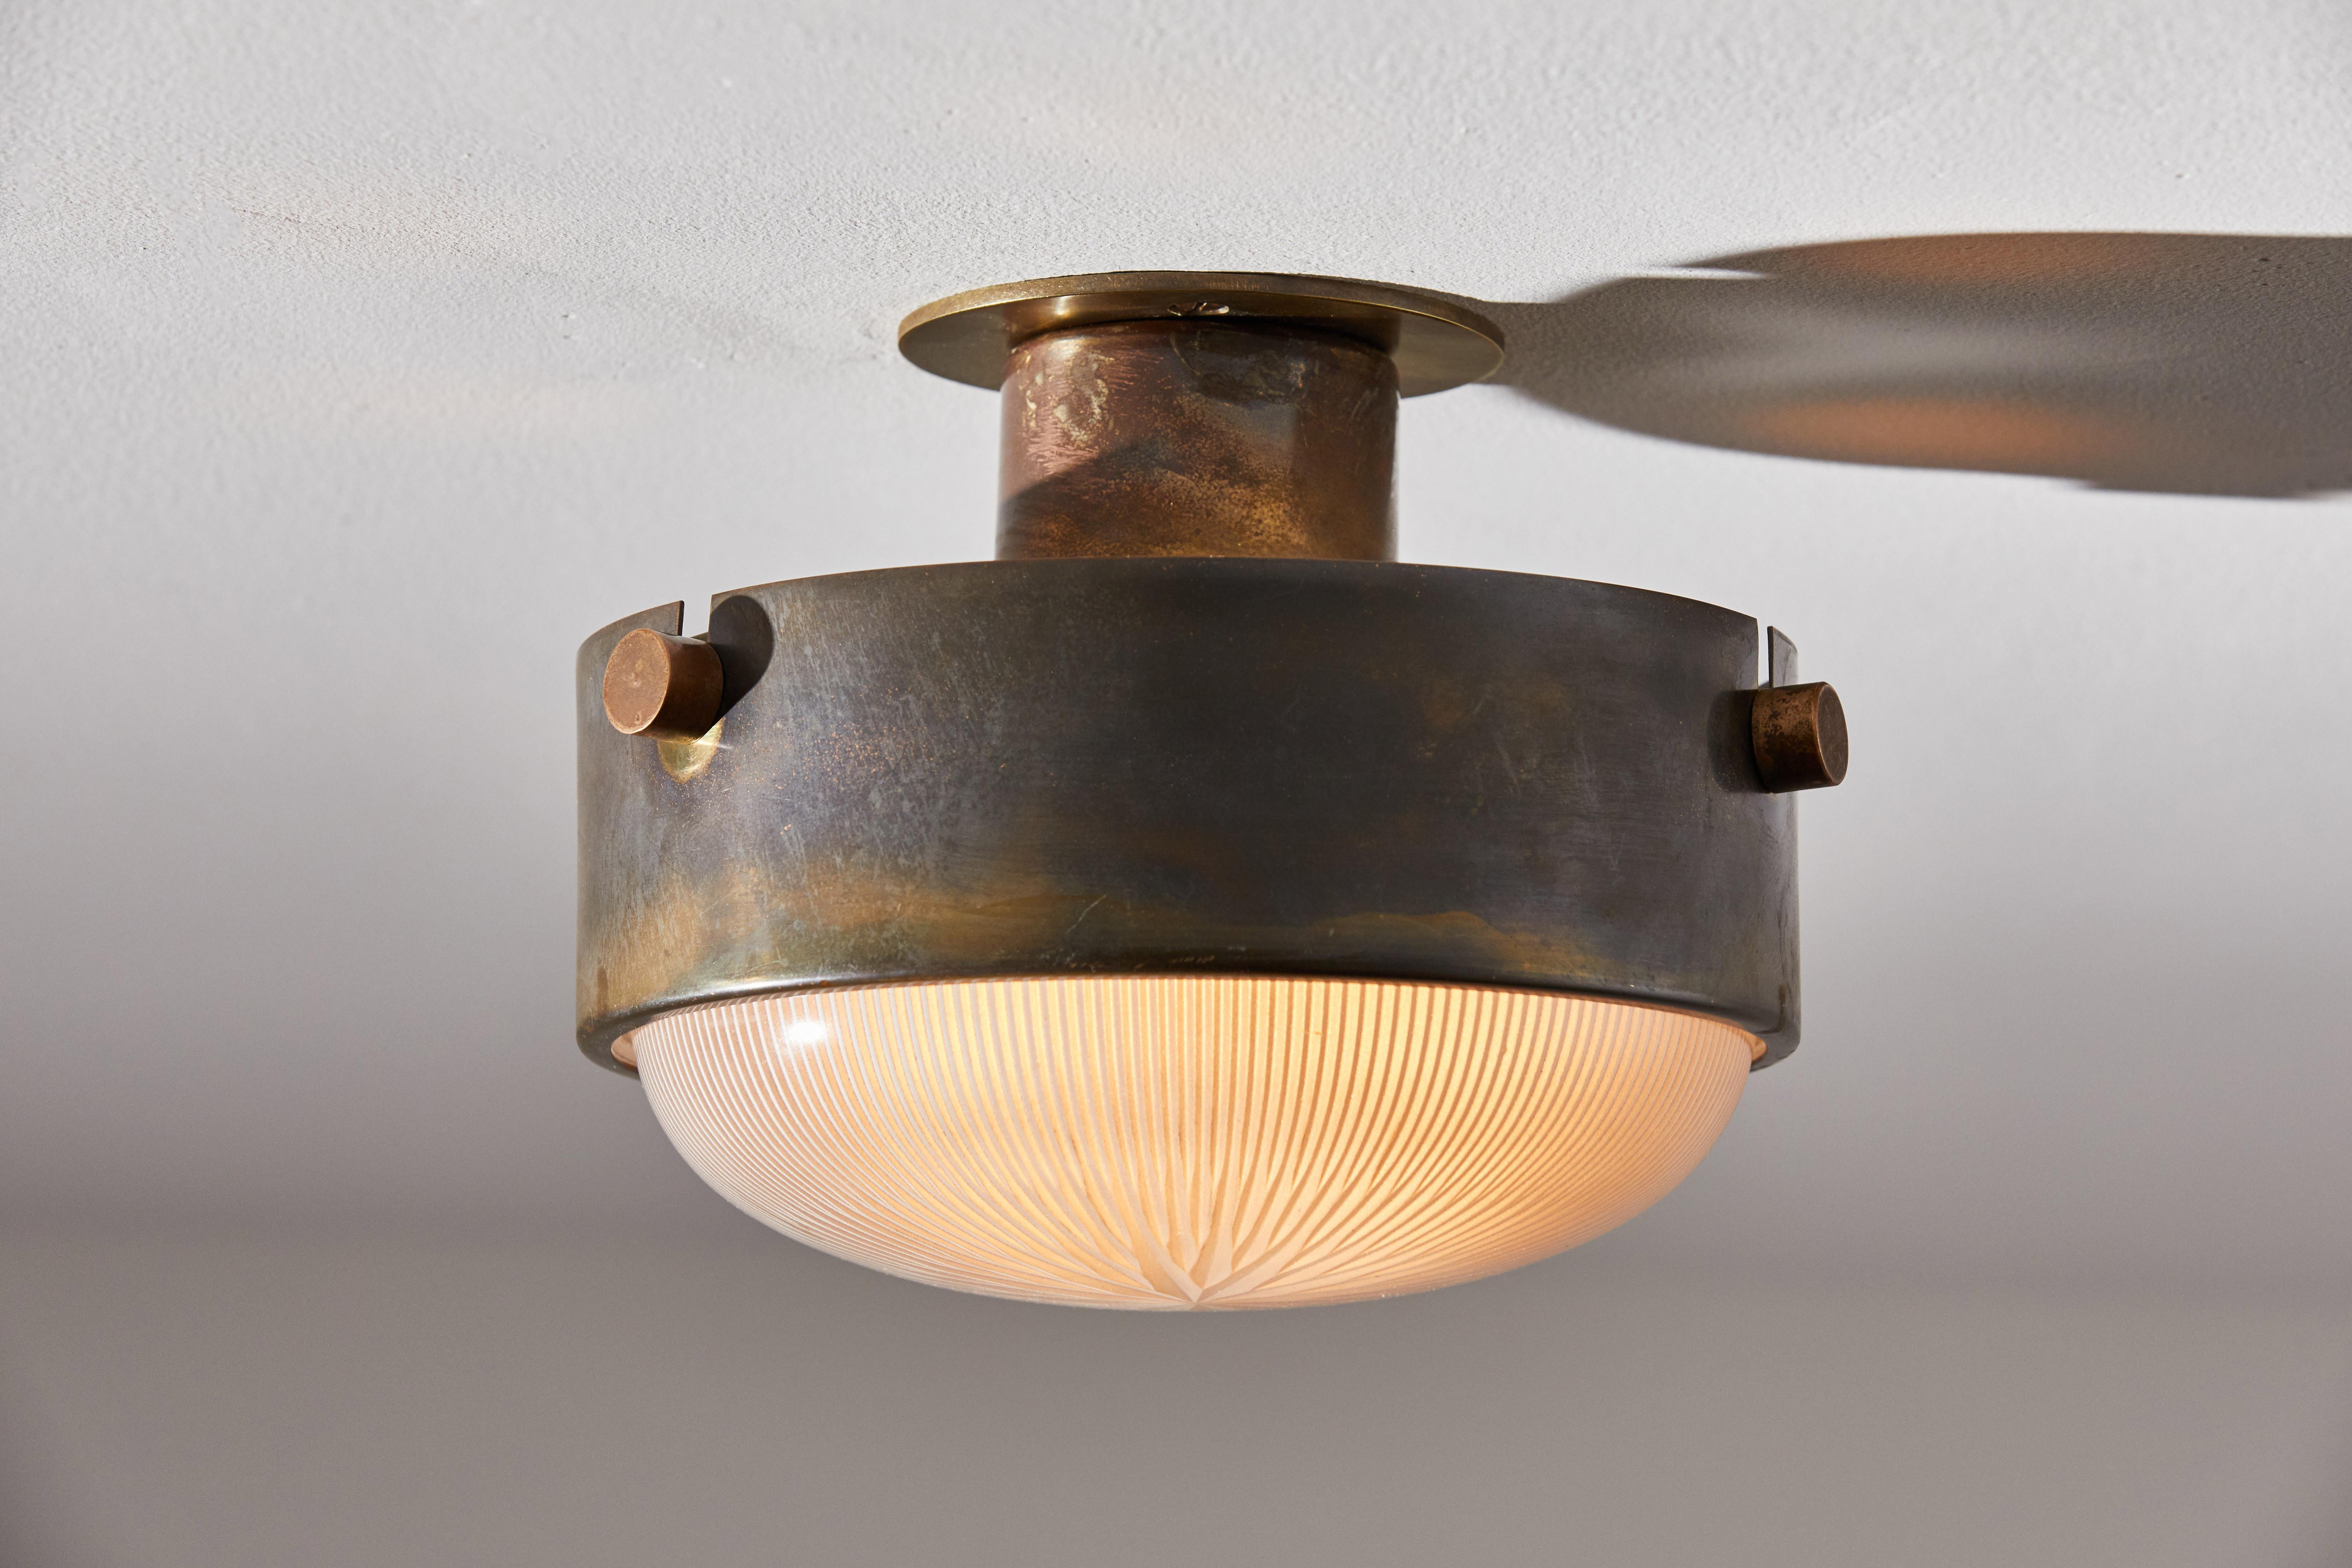 Three flush mount ceiling lights by Ignazio Gardella. Designed and manufactured in Italy, circa 1950s. Brass, Holophane glass. Rewired for U.S. junction boxes. Each light takes one E26 Edison 75w maximum bulb. Bulbs provided as a one time courtesy.